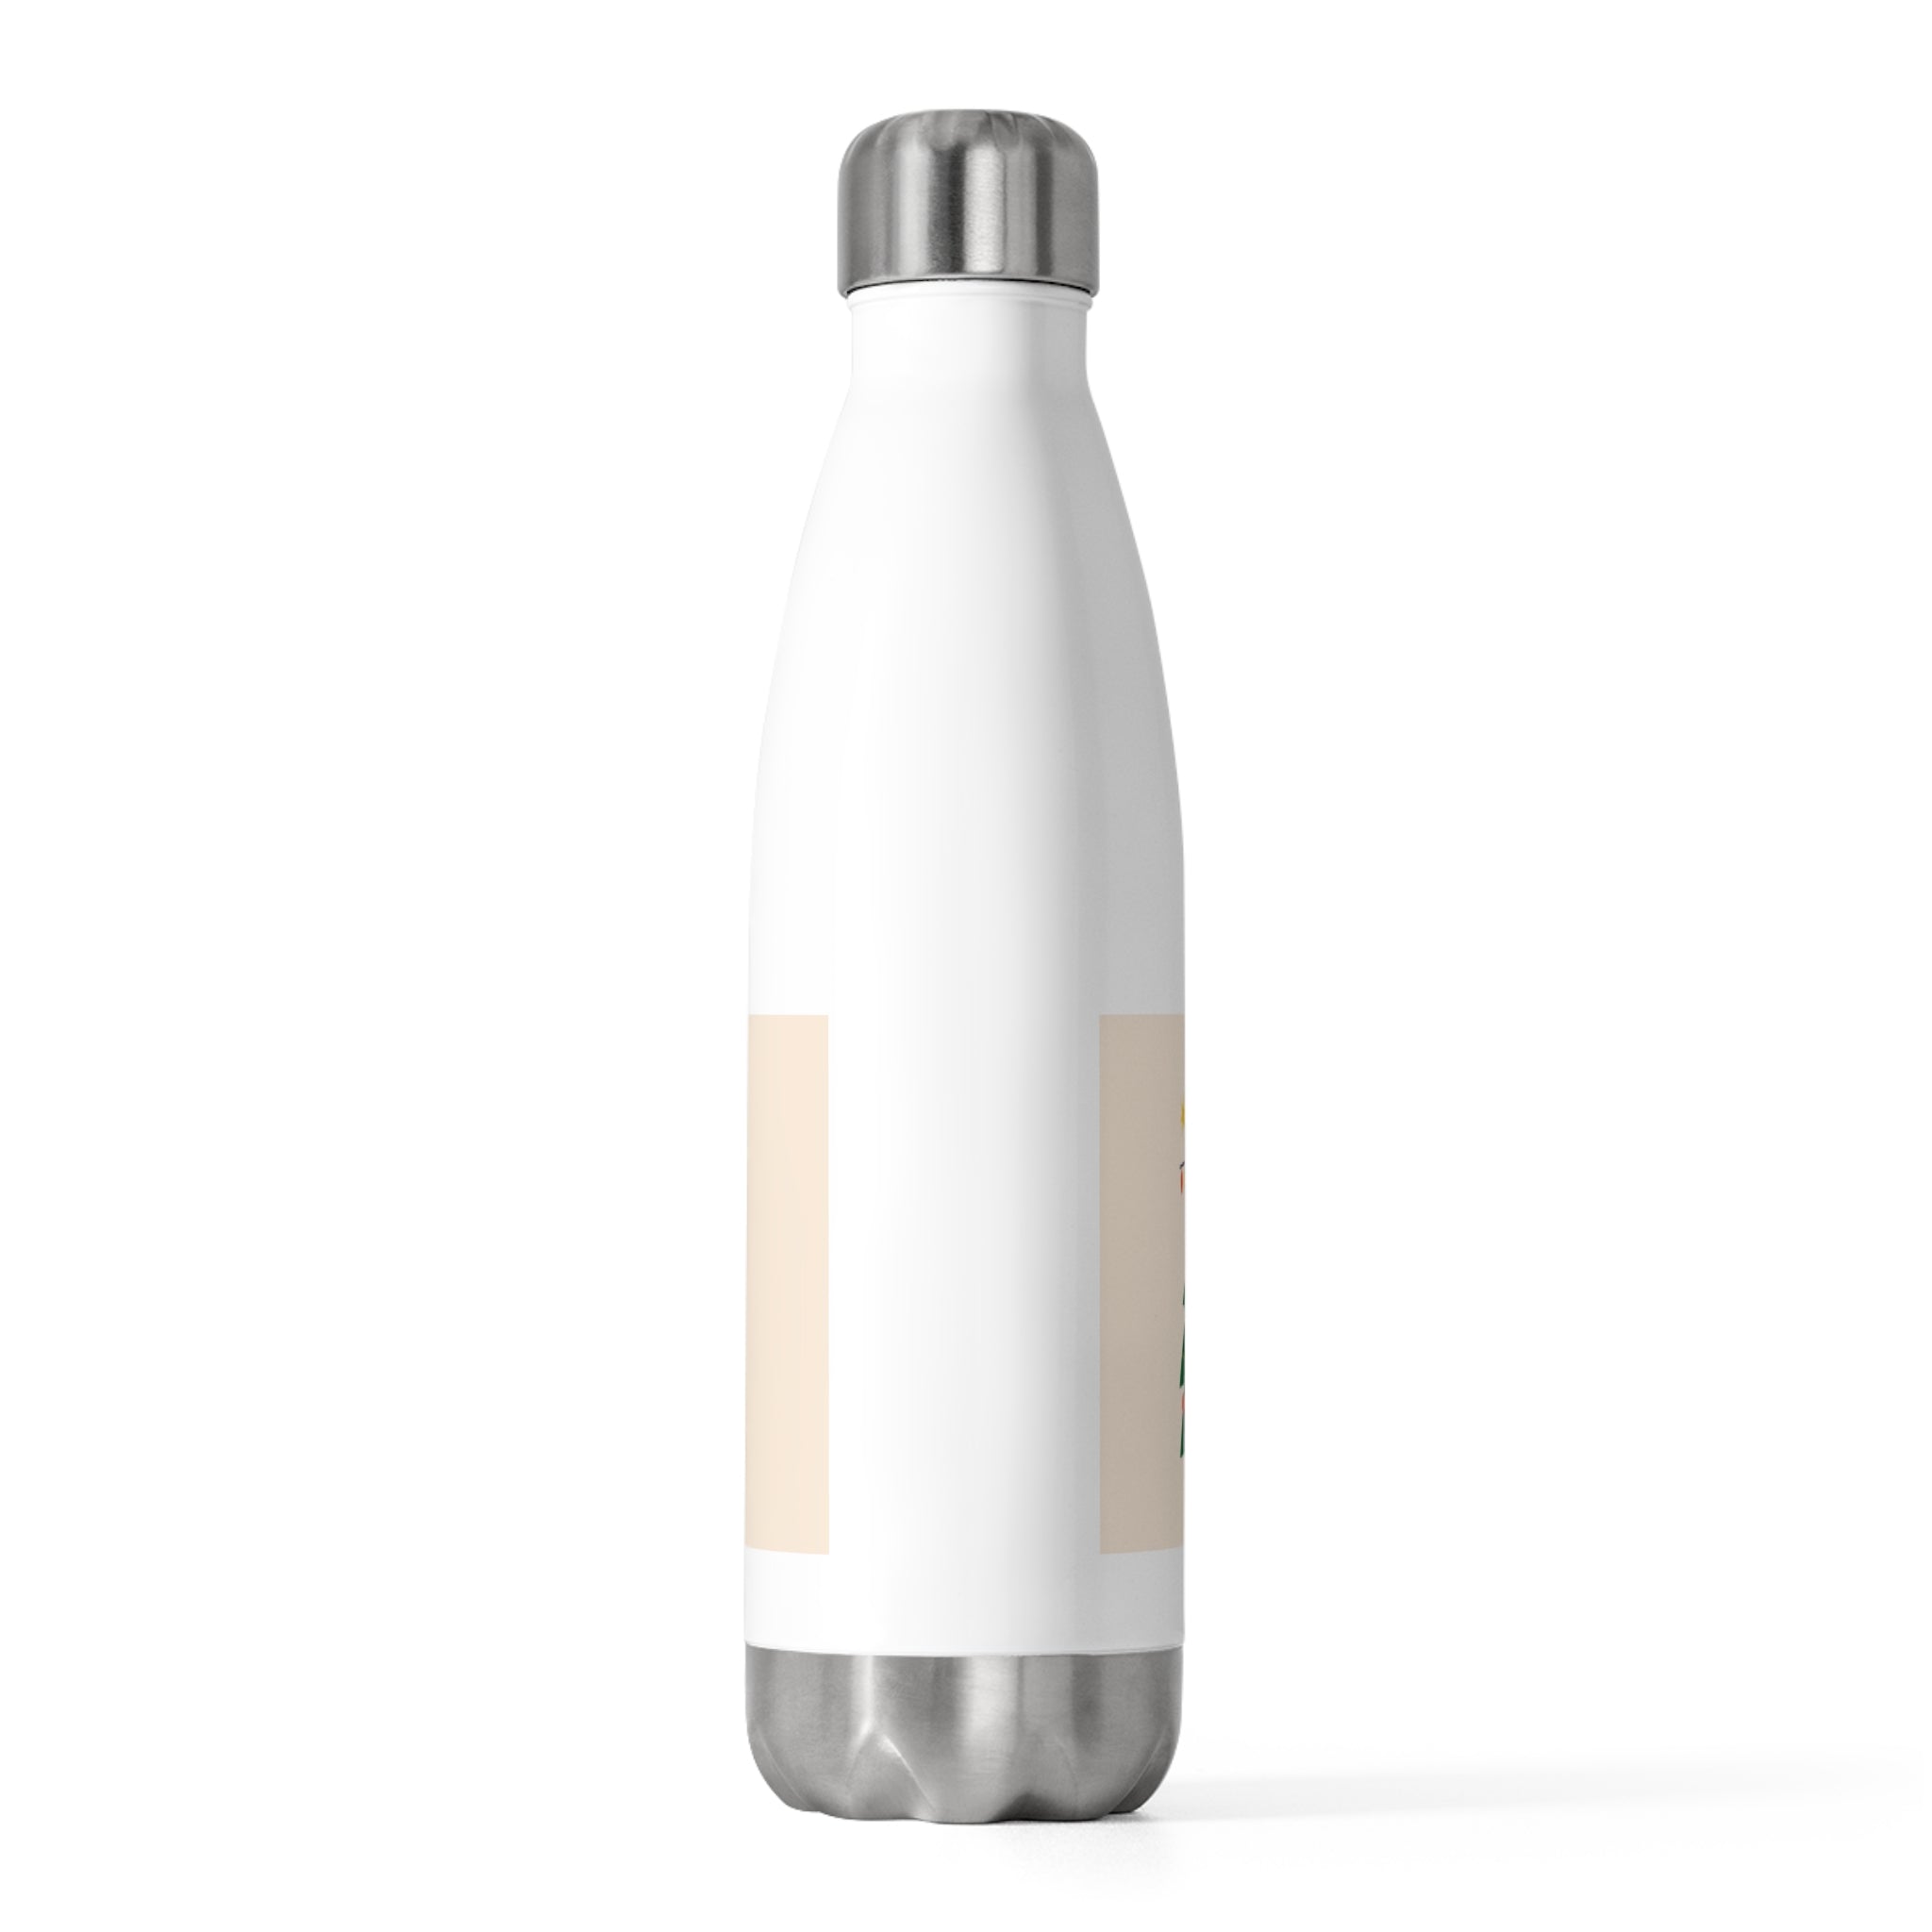 20oz Insulated Christmas Bottle Biege - Infinite Pack